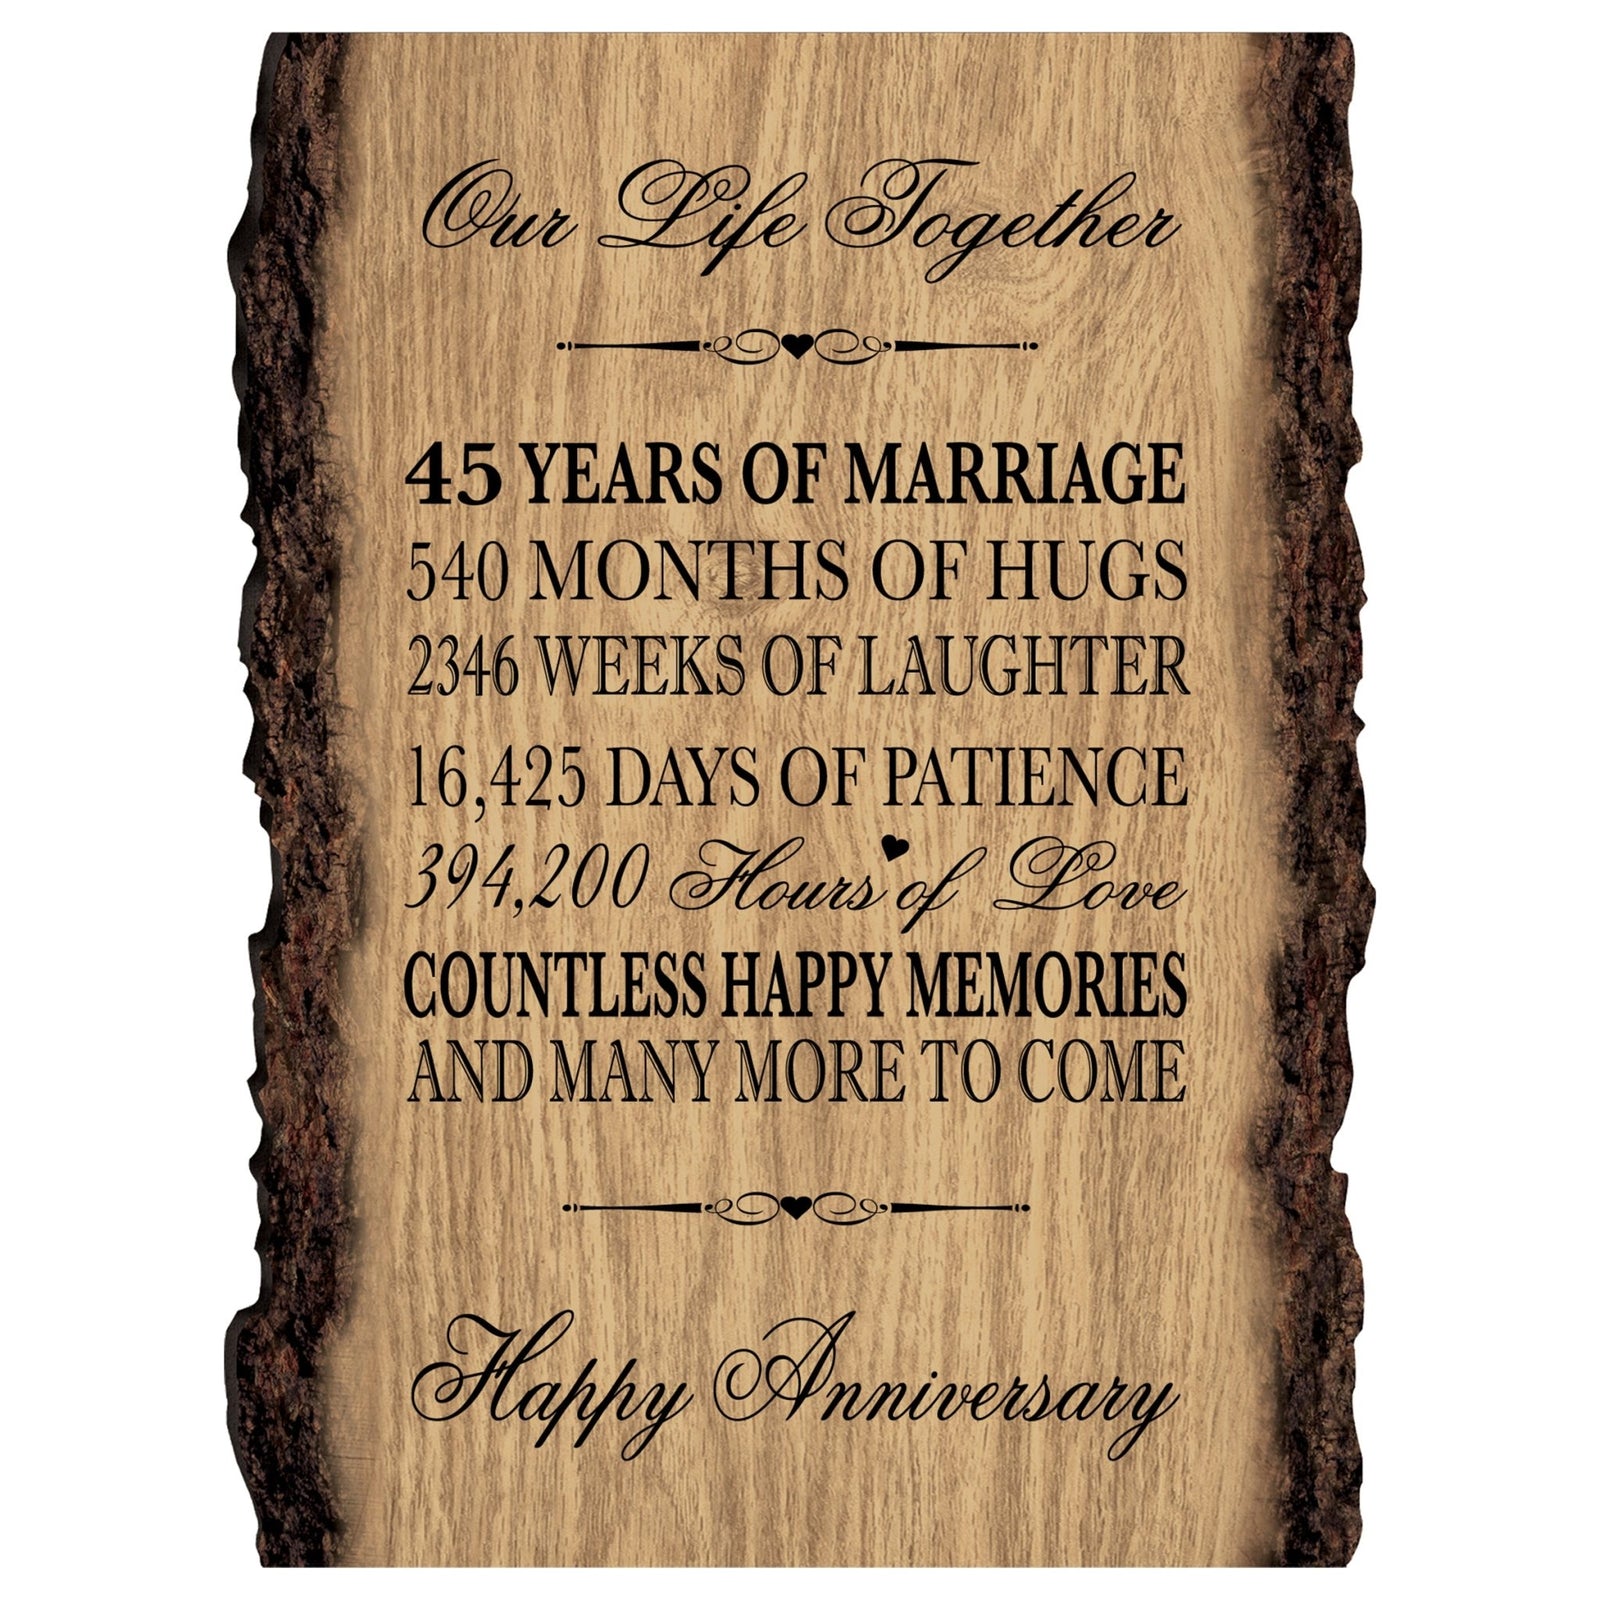 Rustic Wedding Anniversary 9x12 Barky Wall Plaque Gift For Parents, Grandparents New Couple - 45 Years Of Marriage - LifeSong Milestones